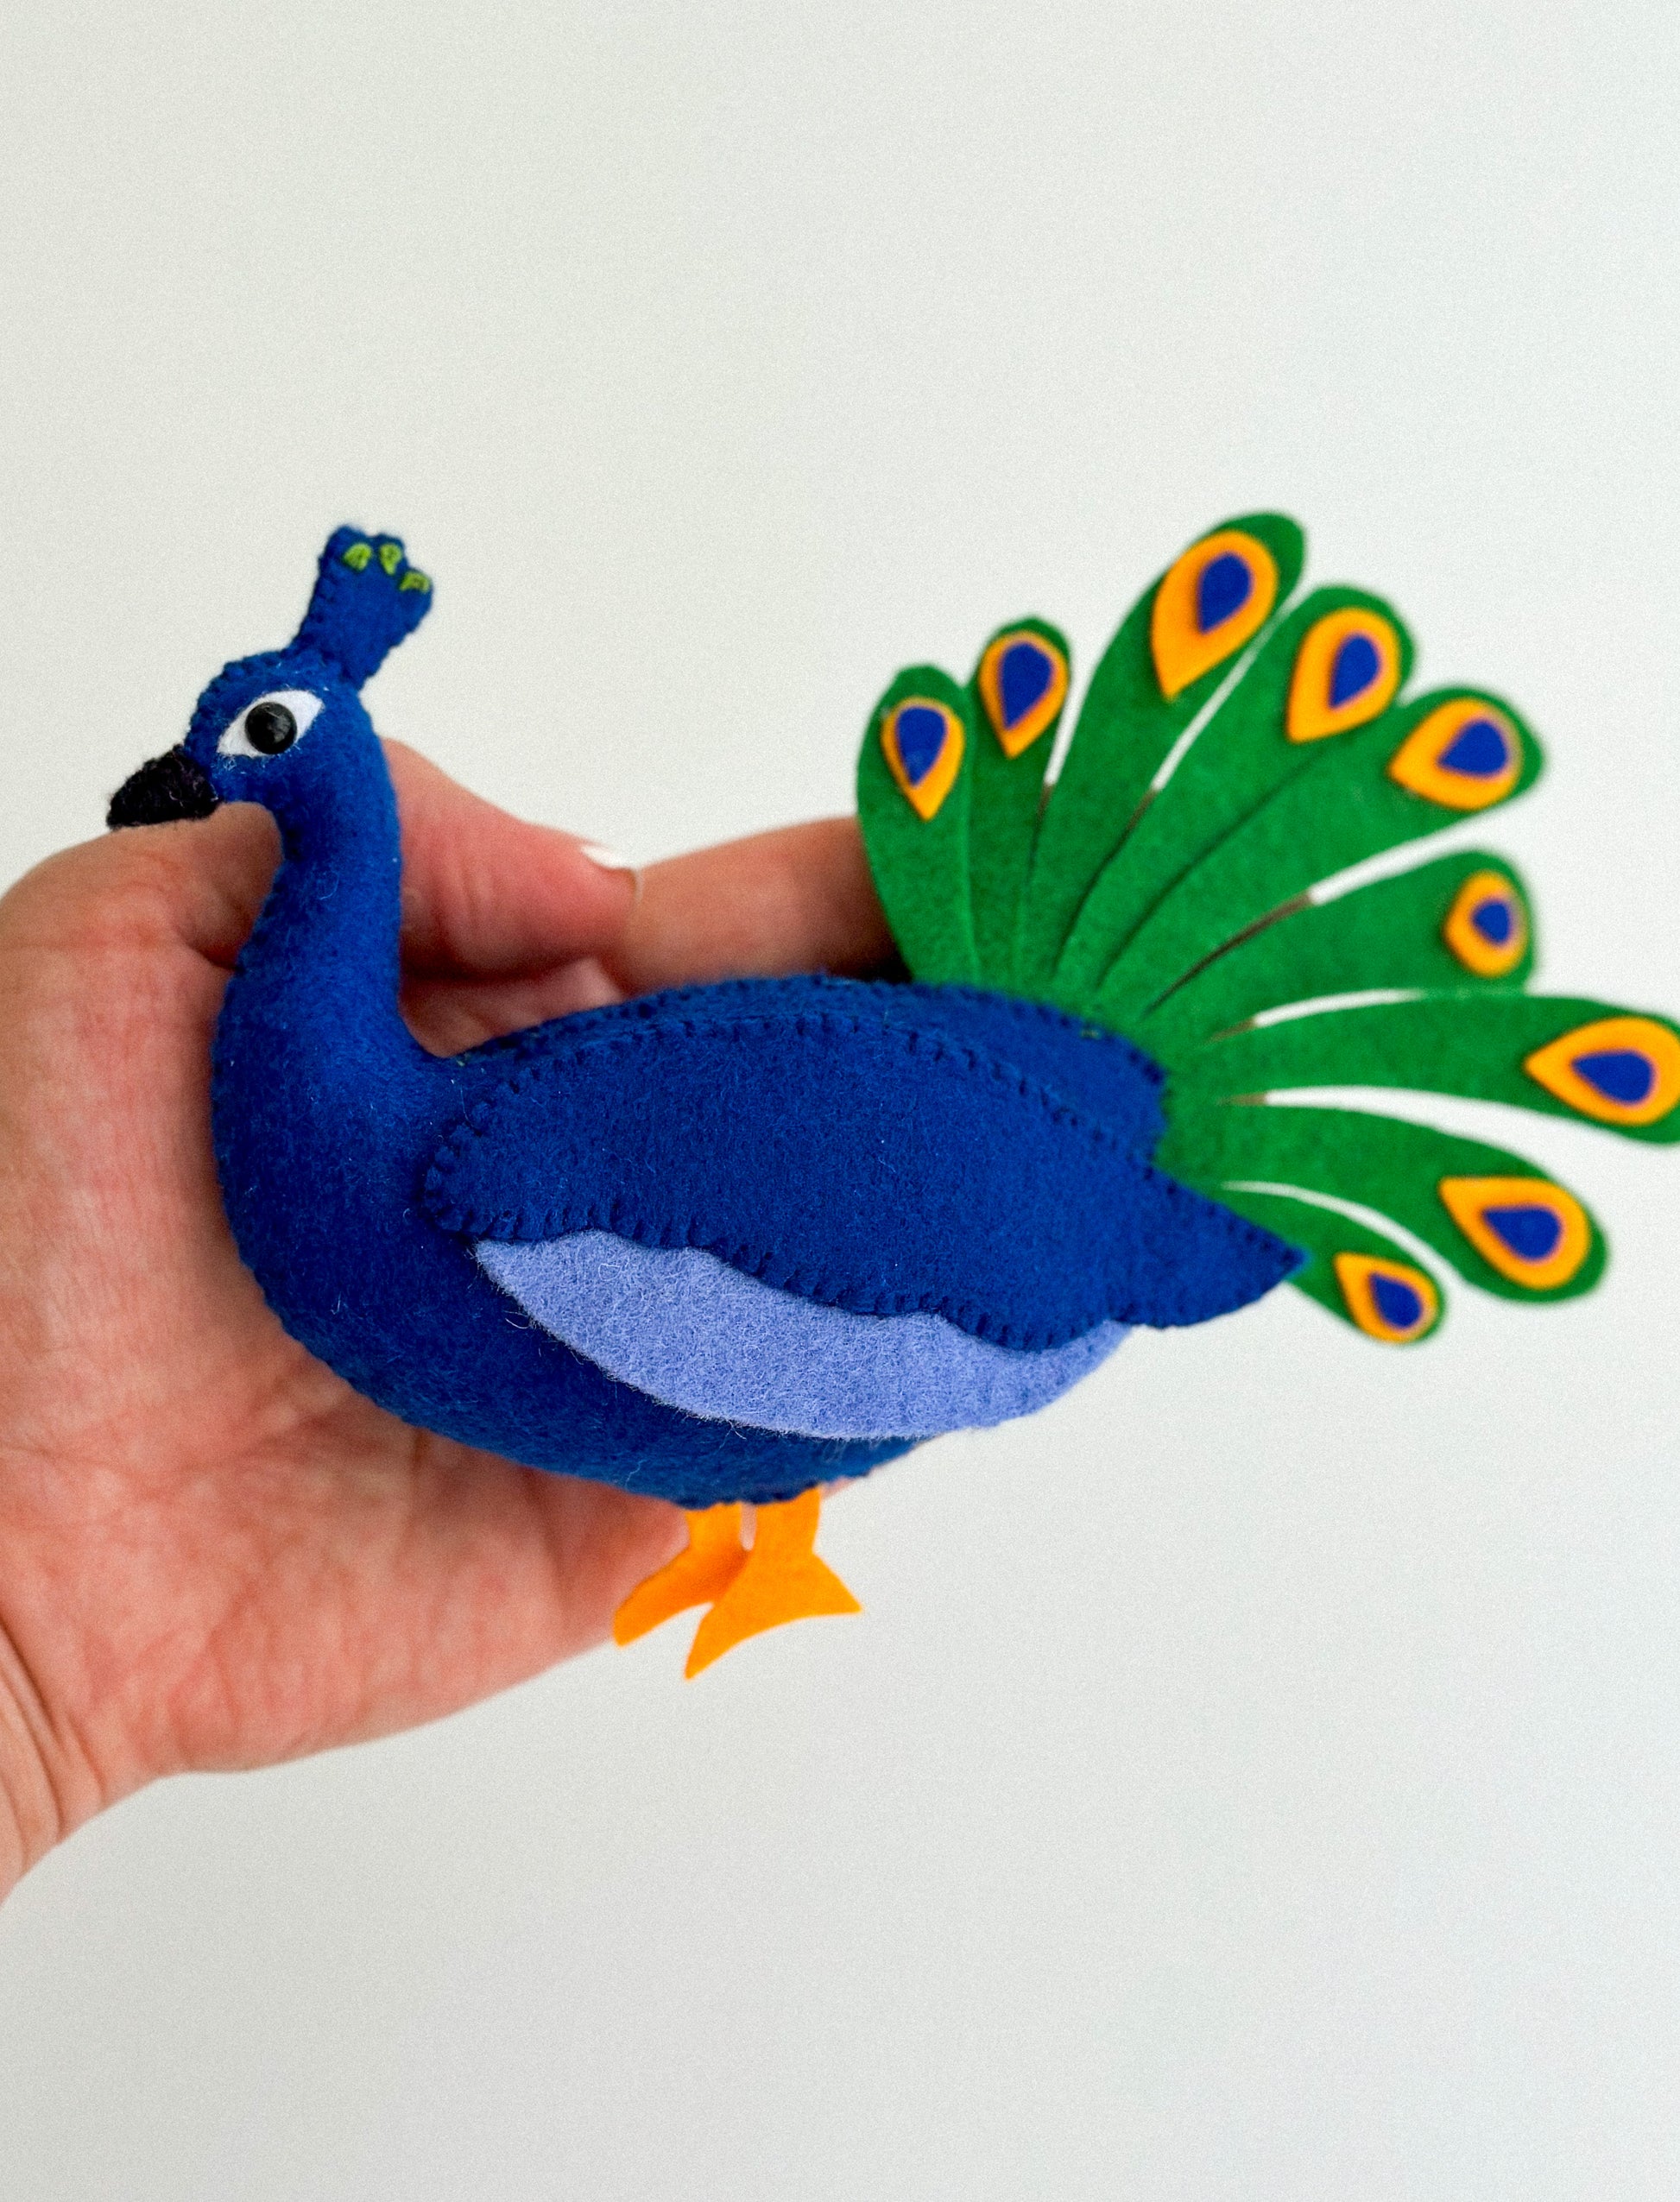 Handcrafted Felt Peacock Ornament